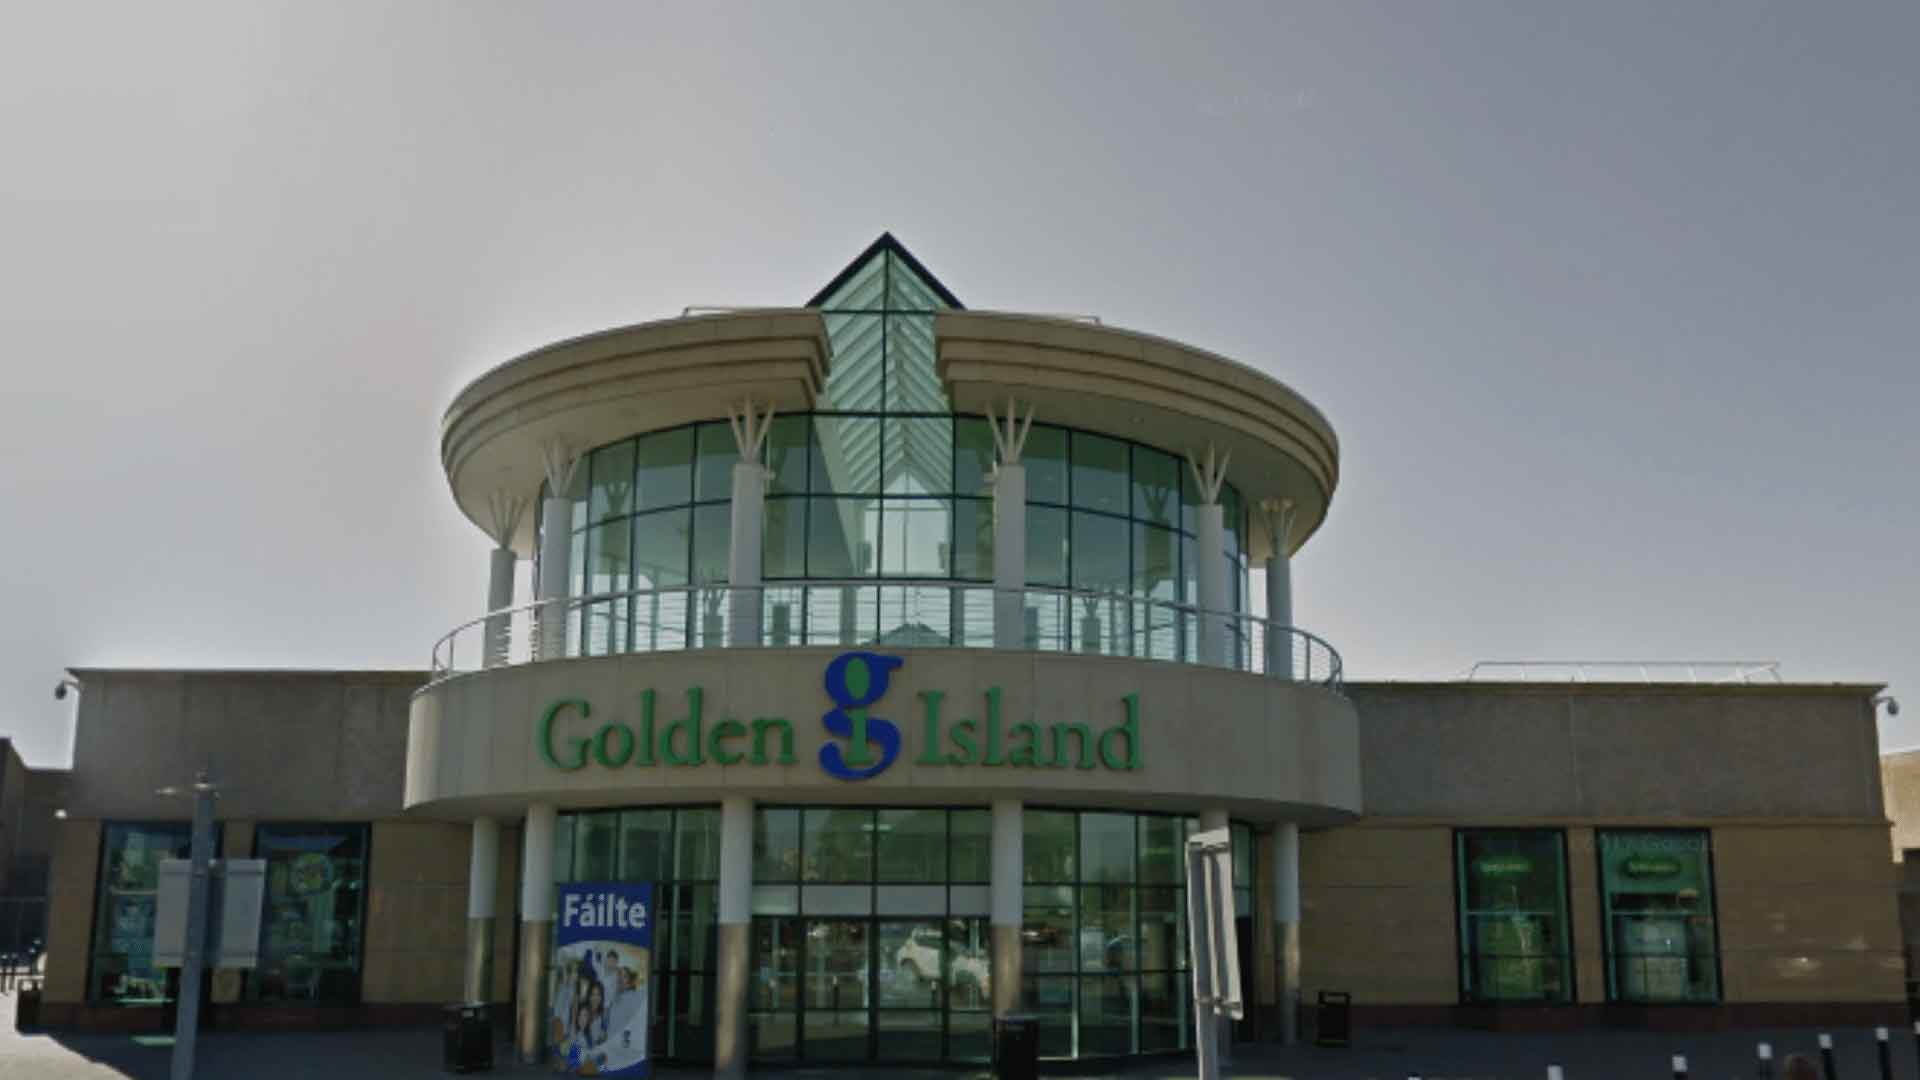 Welcome to Golden Island Shopping Centre, Athlone